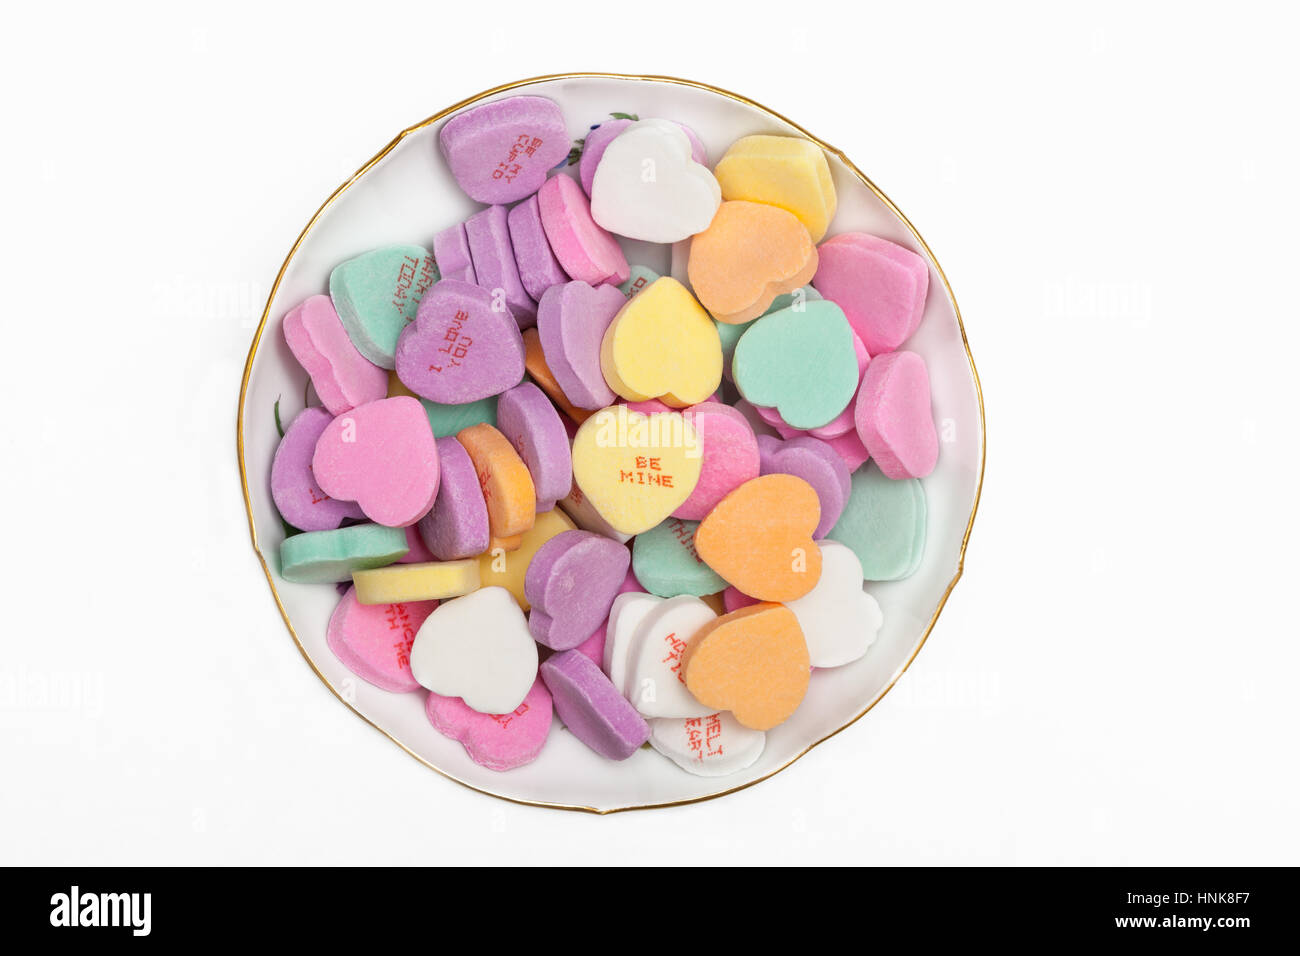 Heart shaped candies in a dish Stock Photo